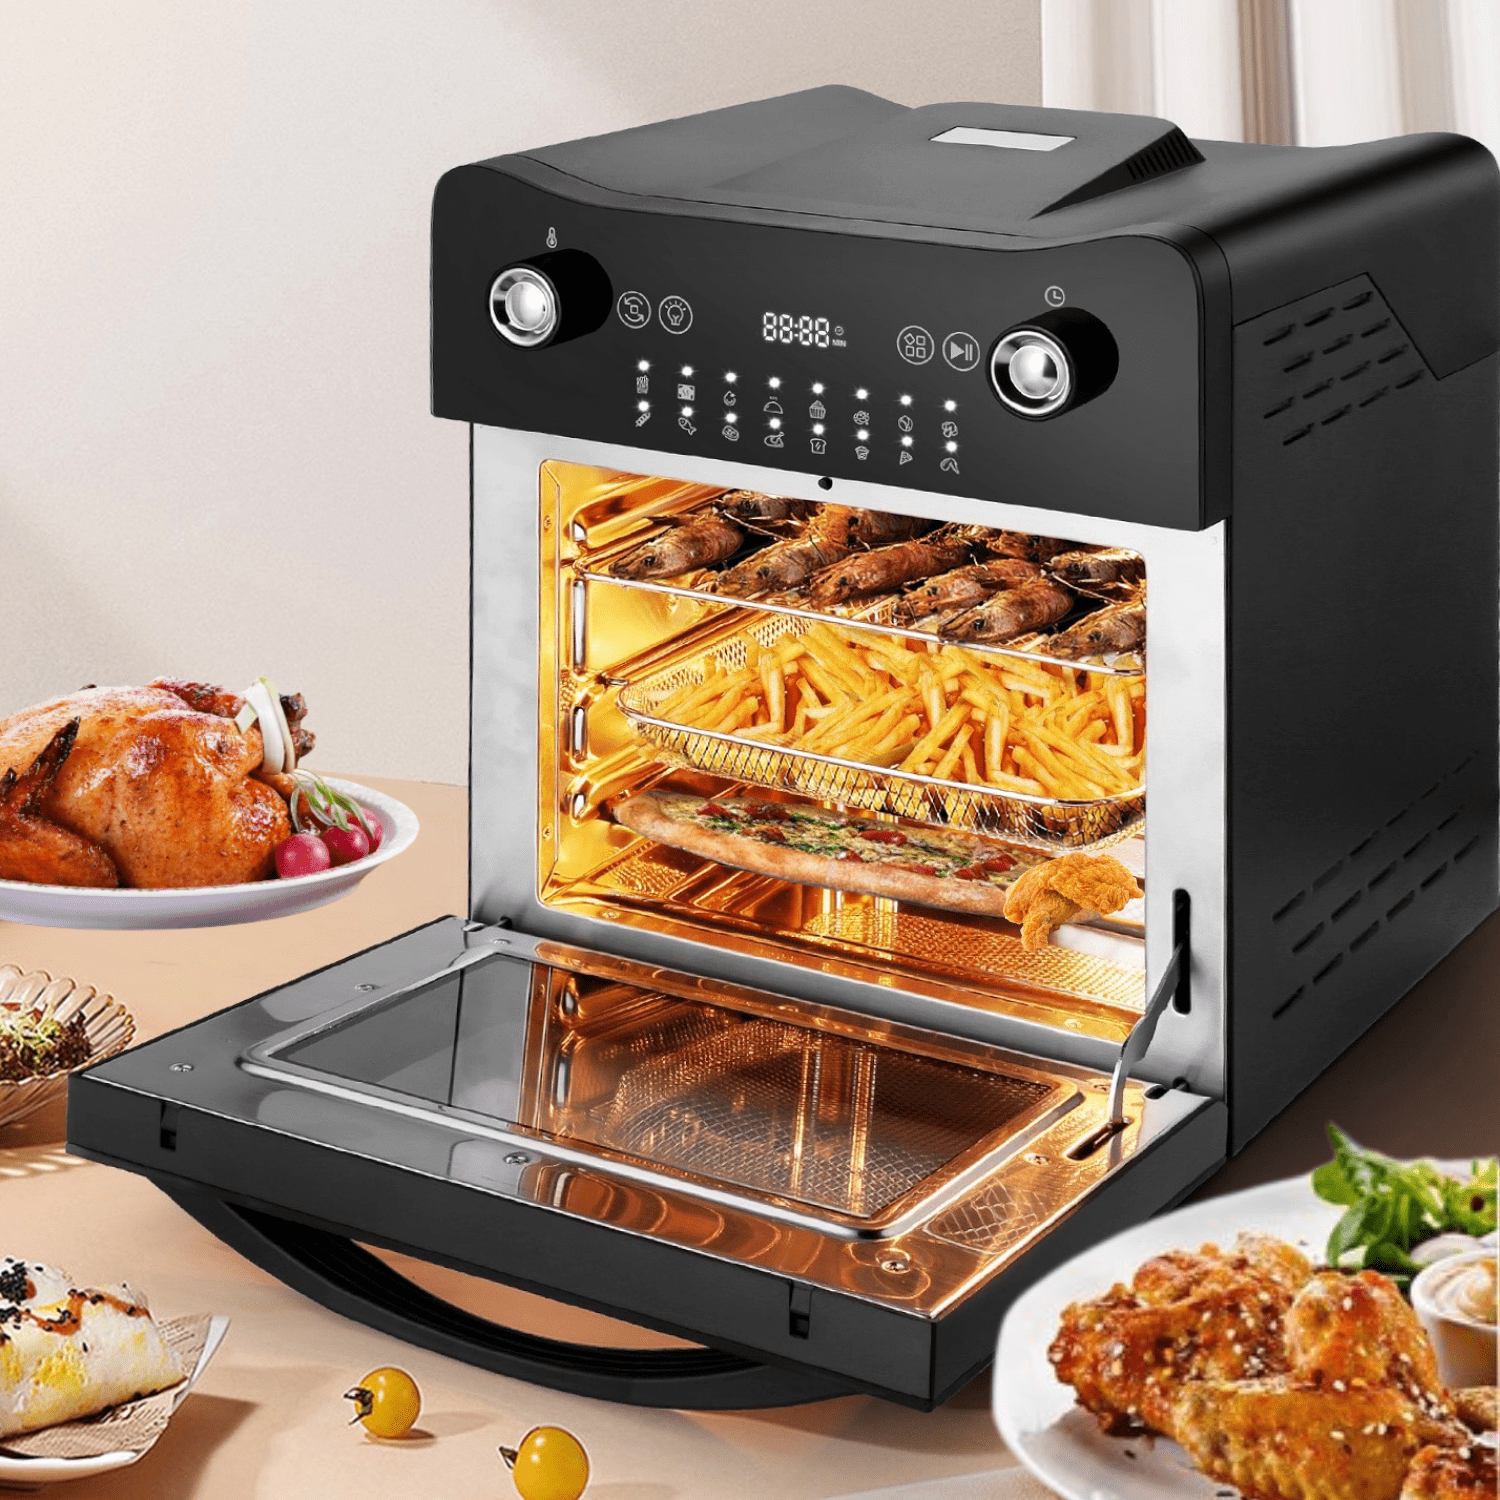 110V 10L Small Electric Oven Multifunctional Toaster Oven with 60 Minutes Timer Household Baking Machine Kitchen Appliances Perfect for Roasting Baking Drying Steaming Defrosting Countertop Oven 